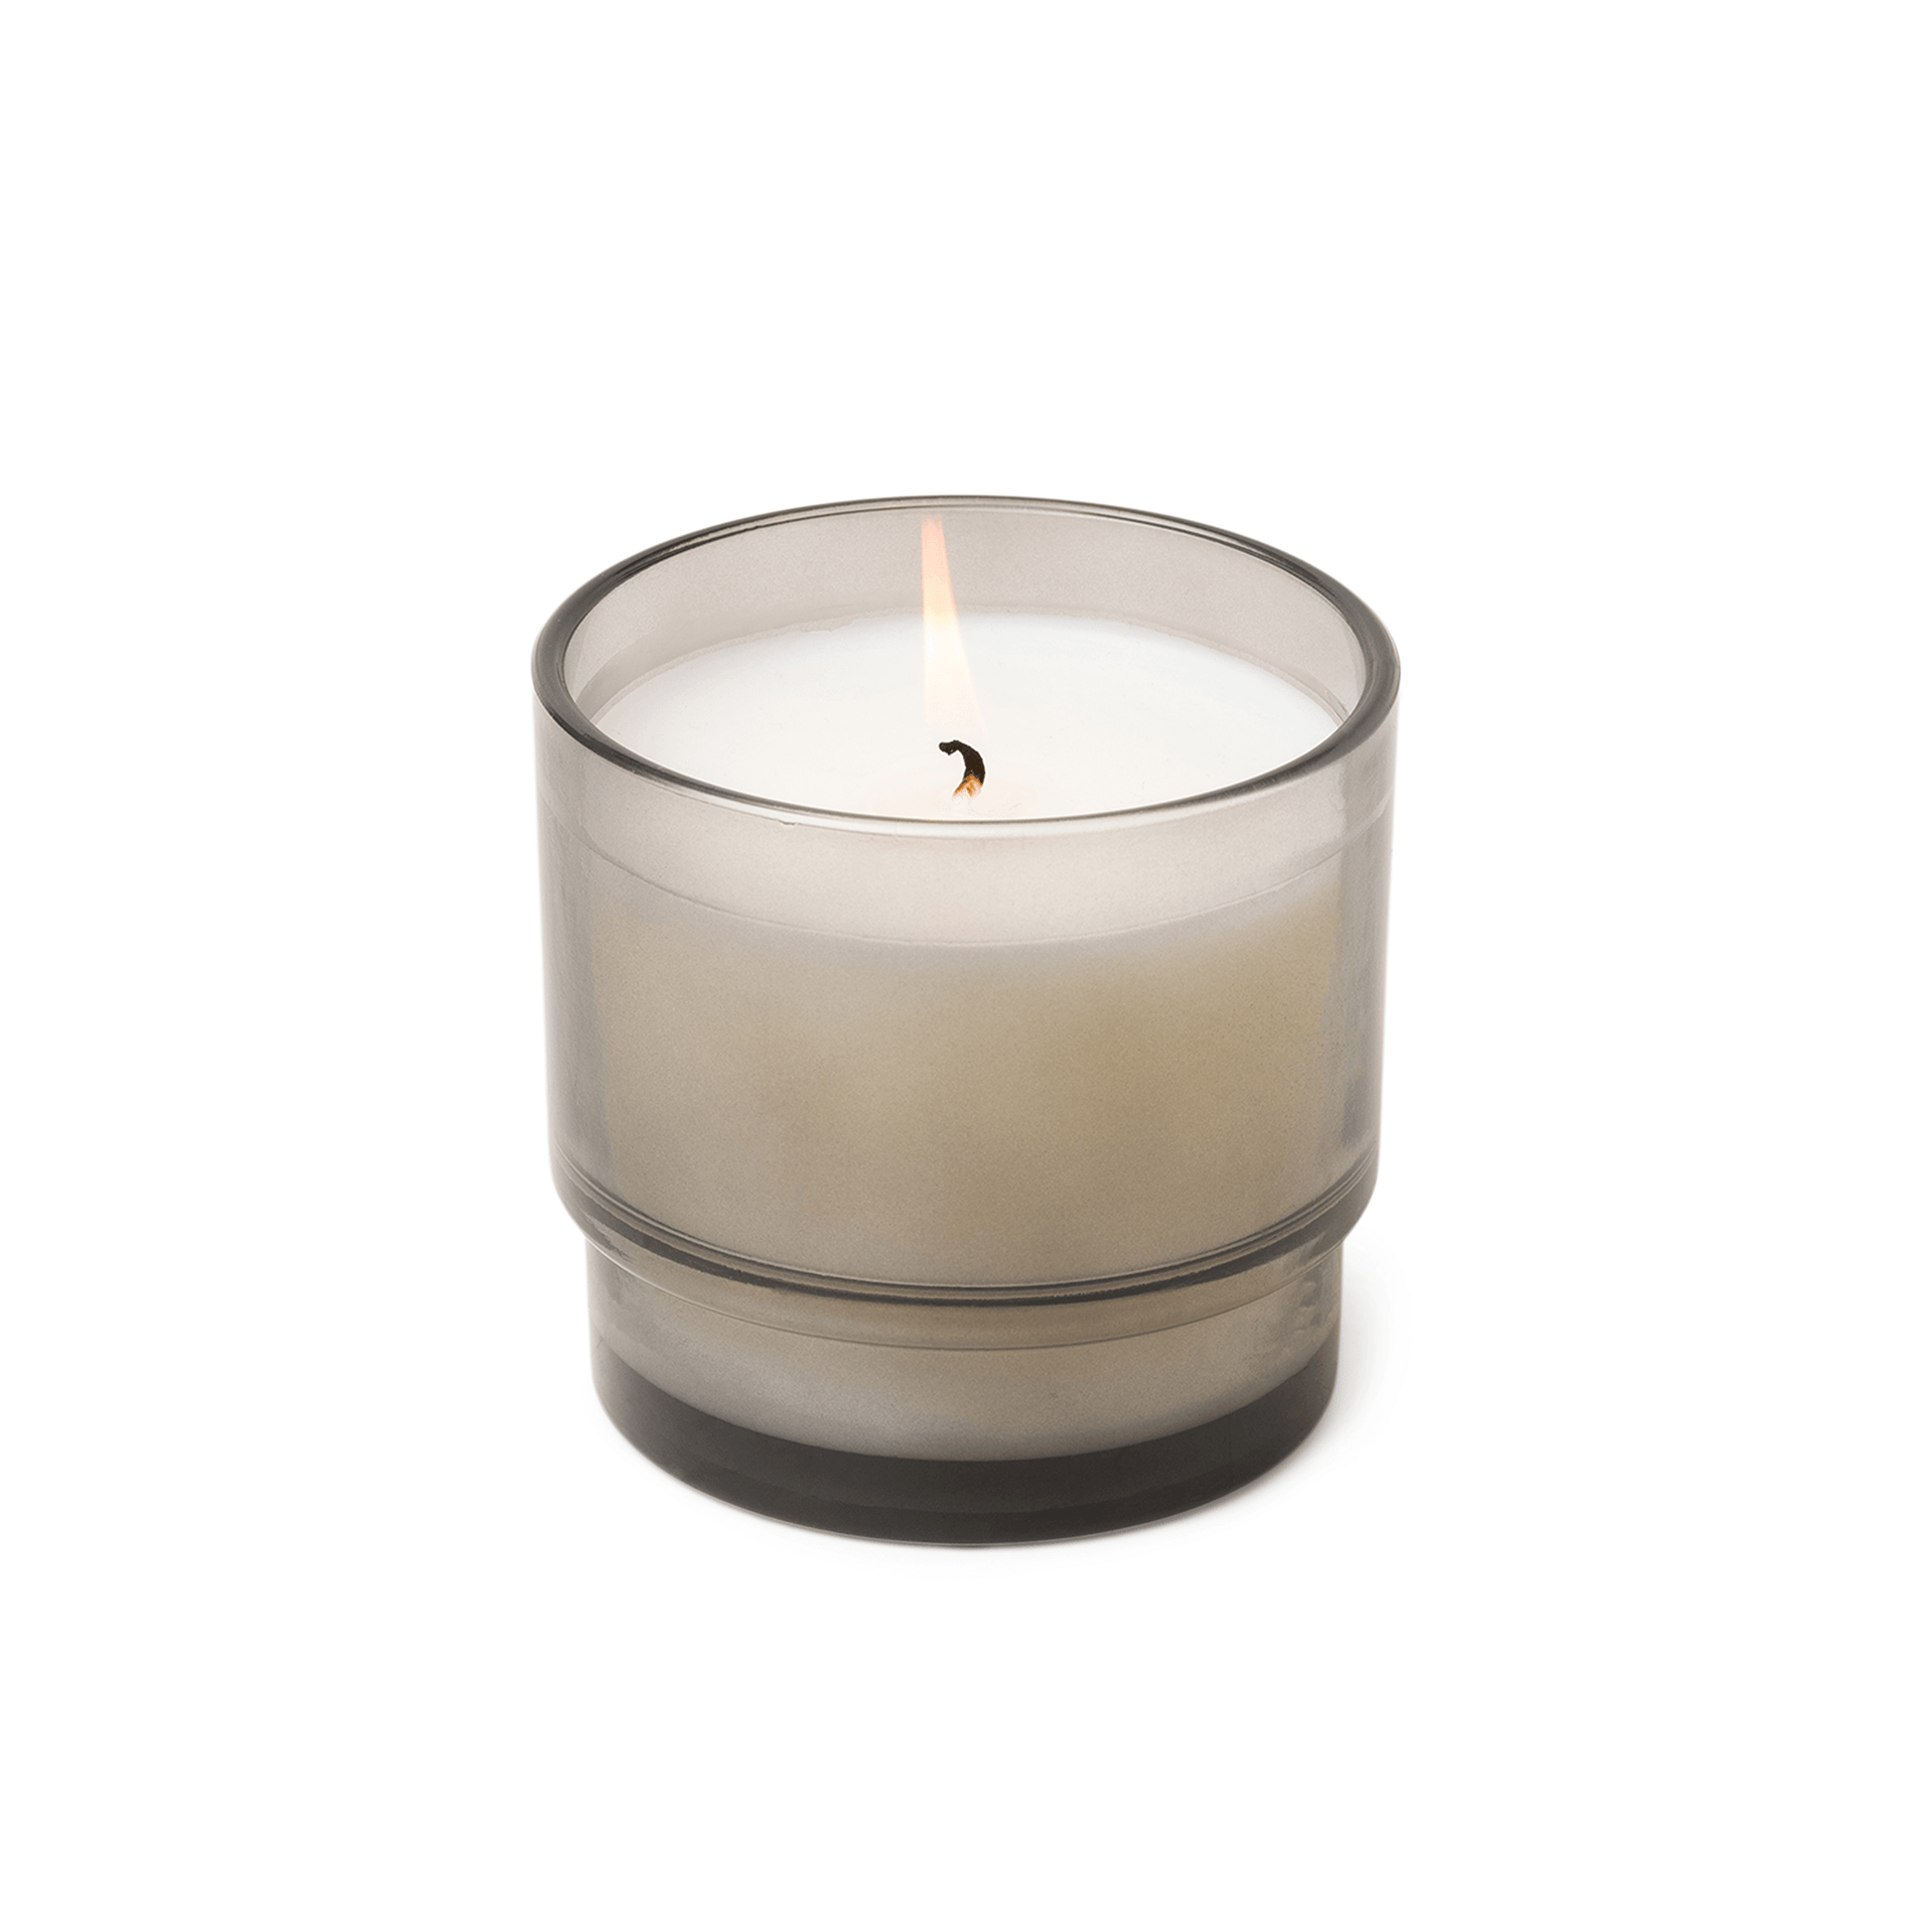 7 oz candle in glass vessel tinted dark gray; white wax; one wick; a part of the Al Fresco collection